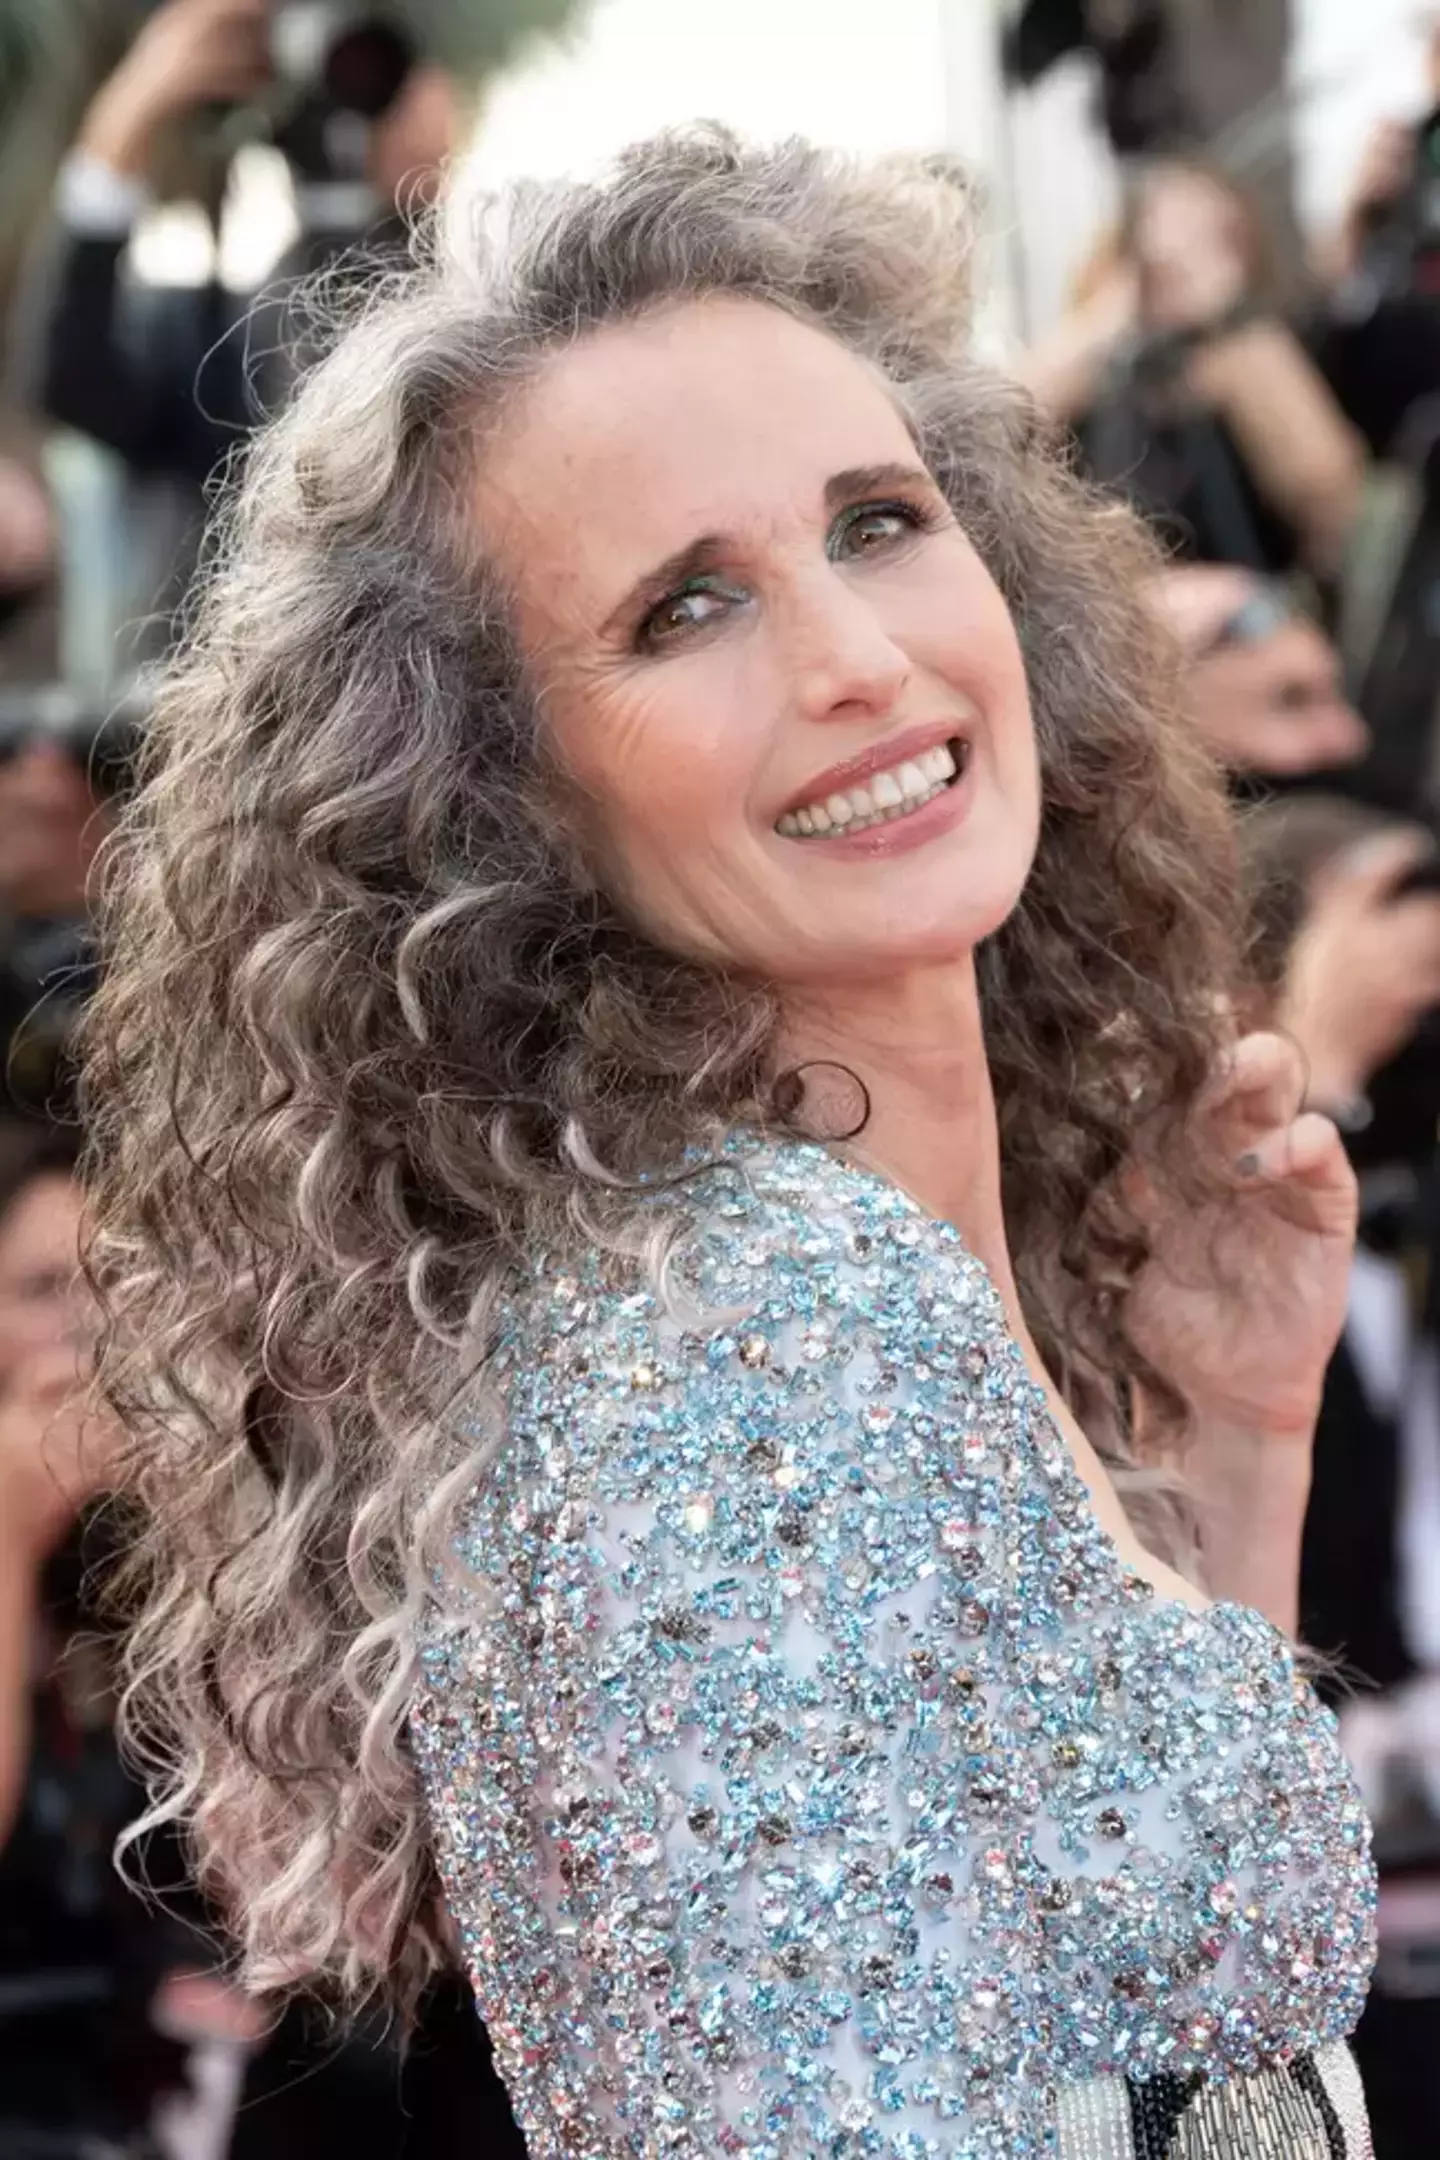 Andie MacDowell has spoken out about how she'd rather grow old with grace.